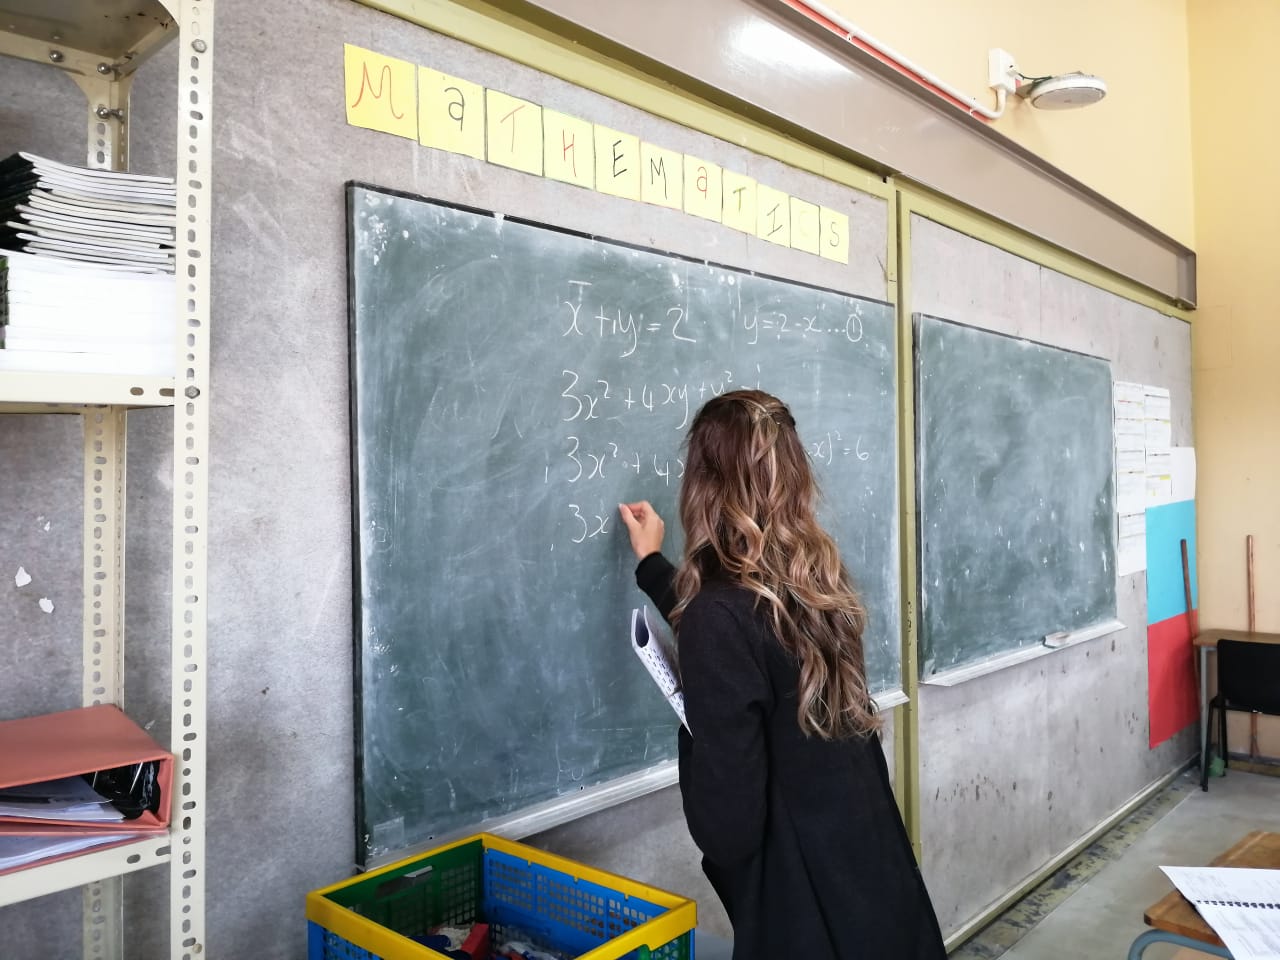 education in crisis | over 31,000 teacher posts unfilled